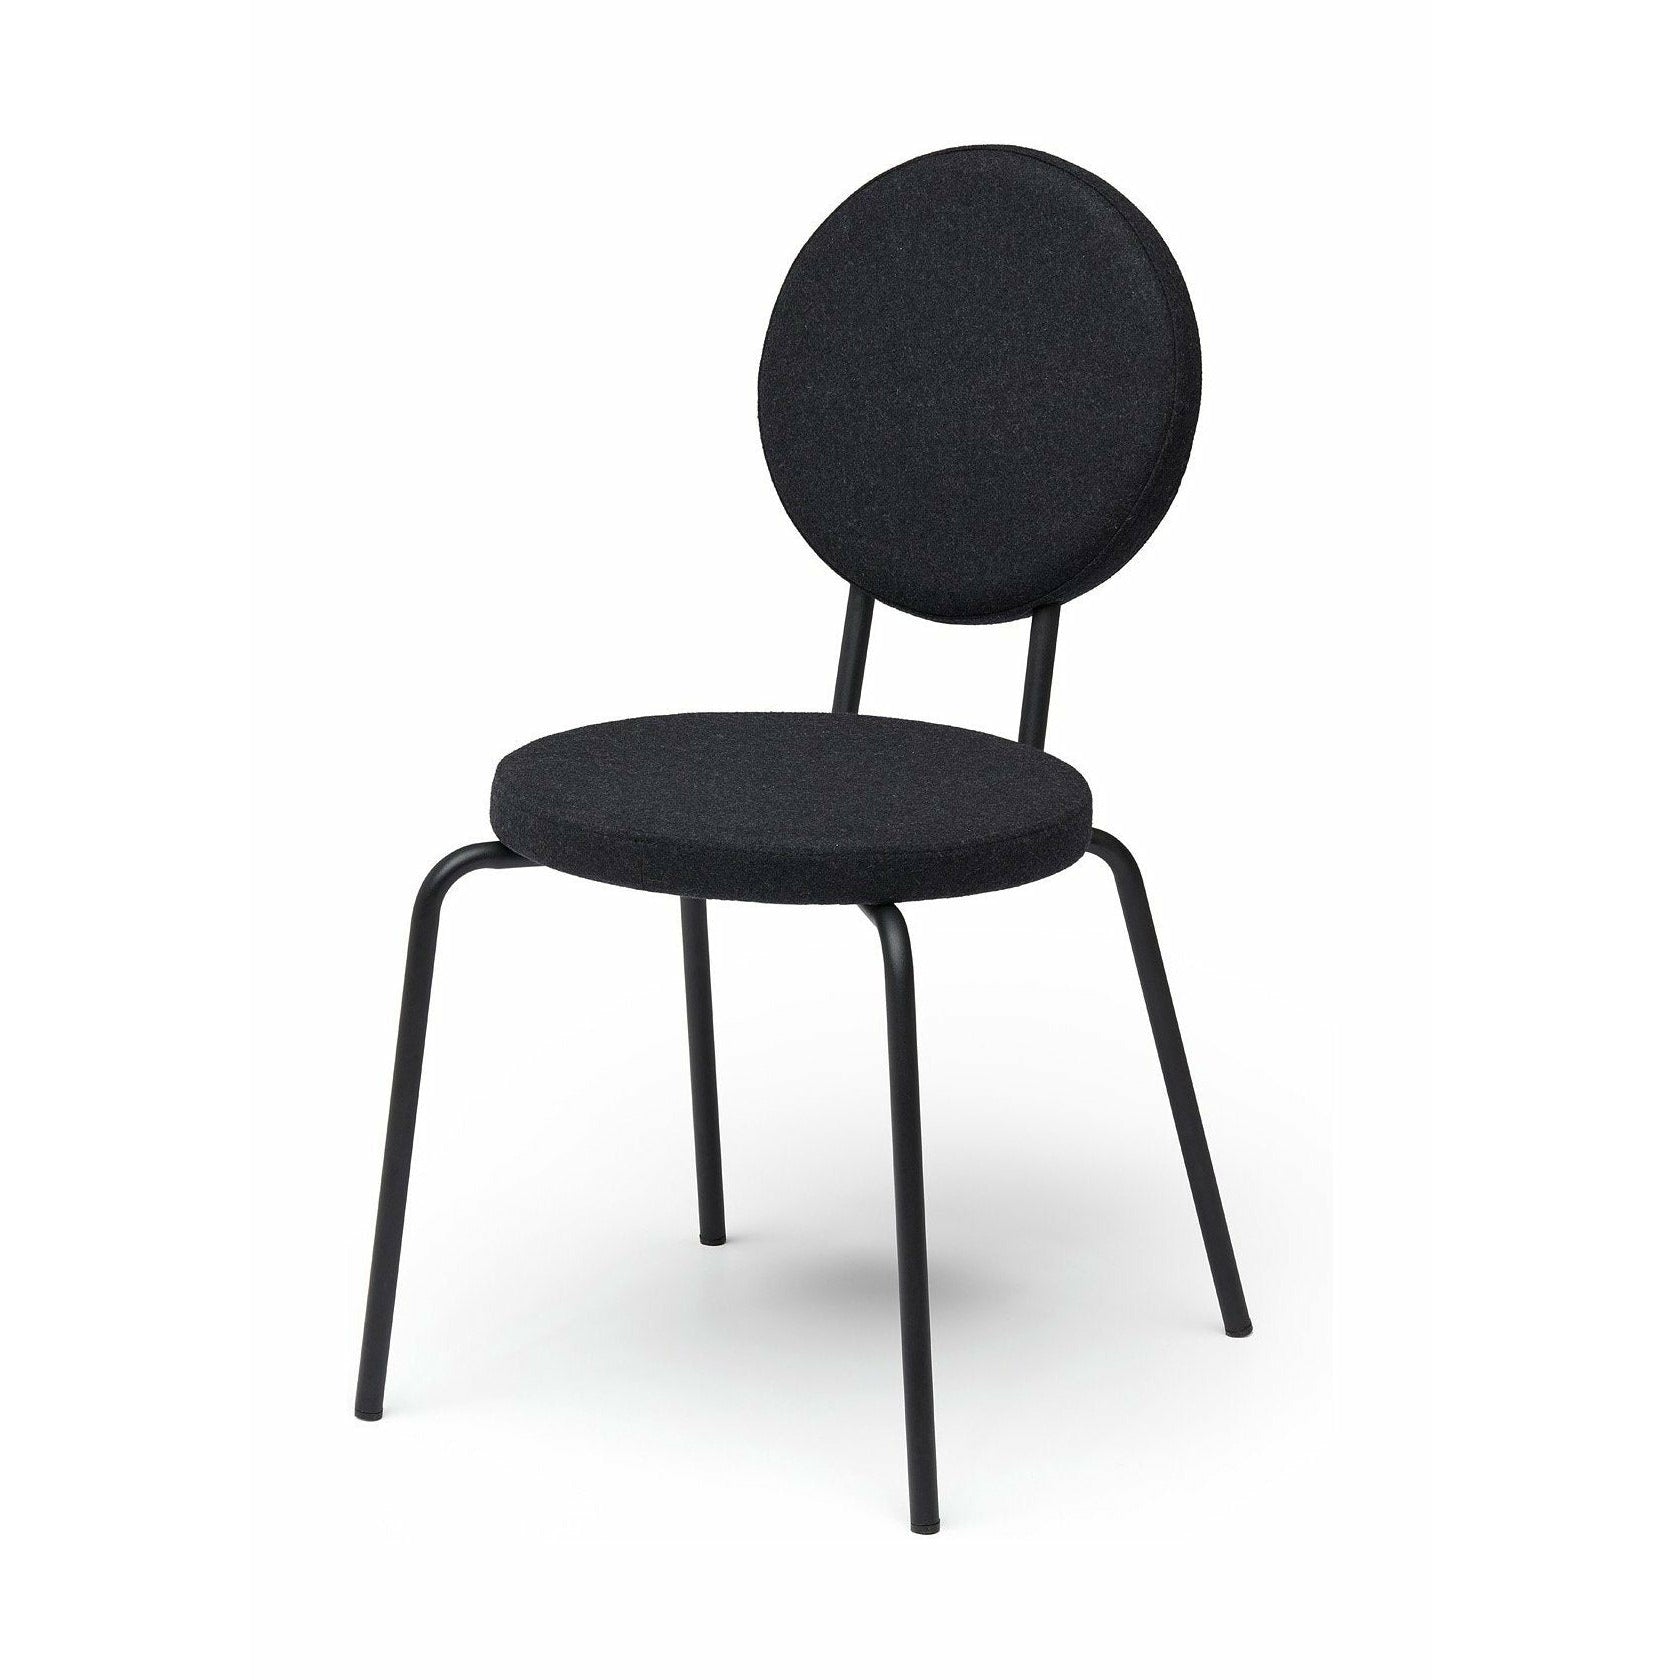 Puik Option Chair Seat And Backrest Round, Black